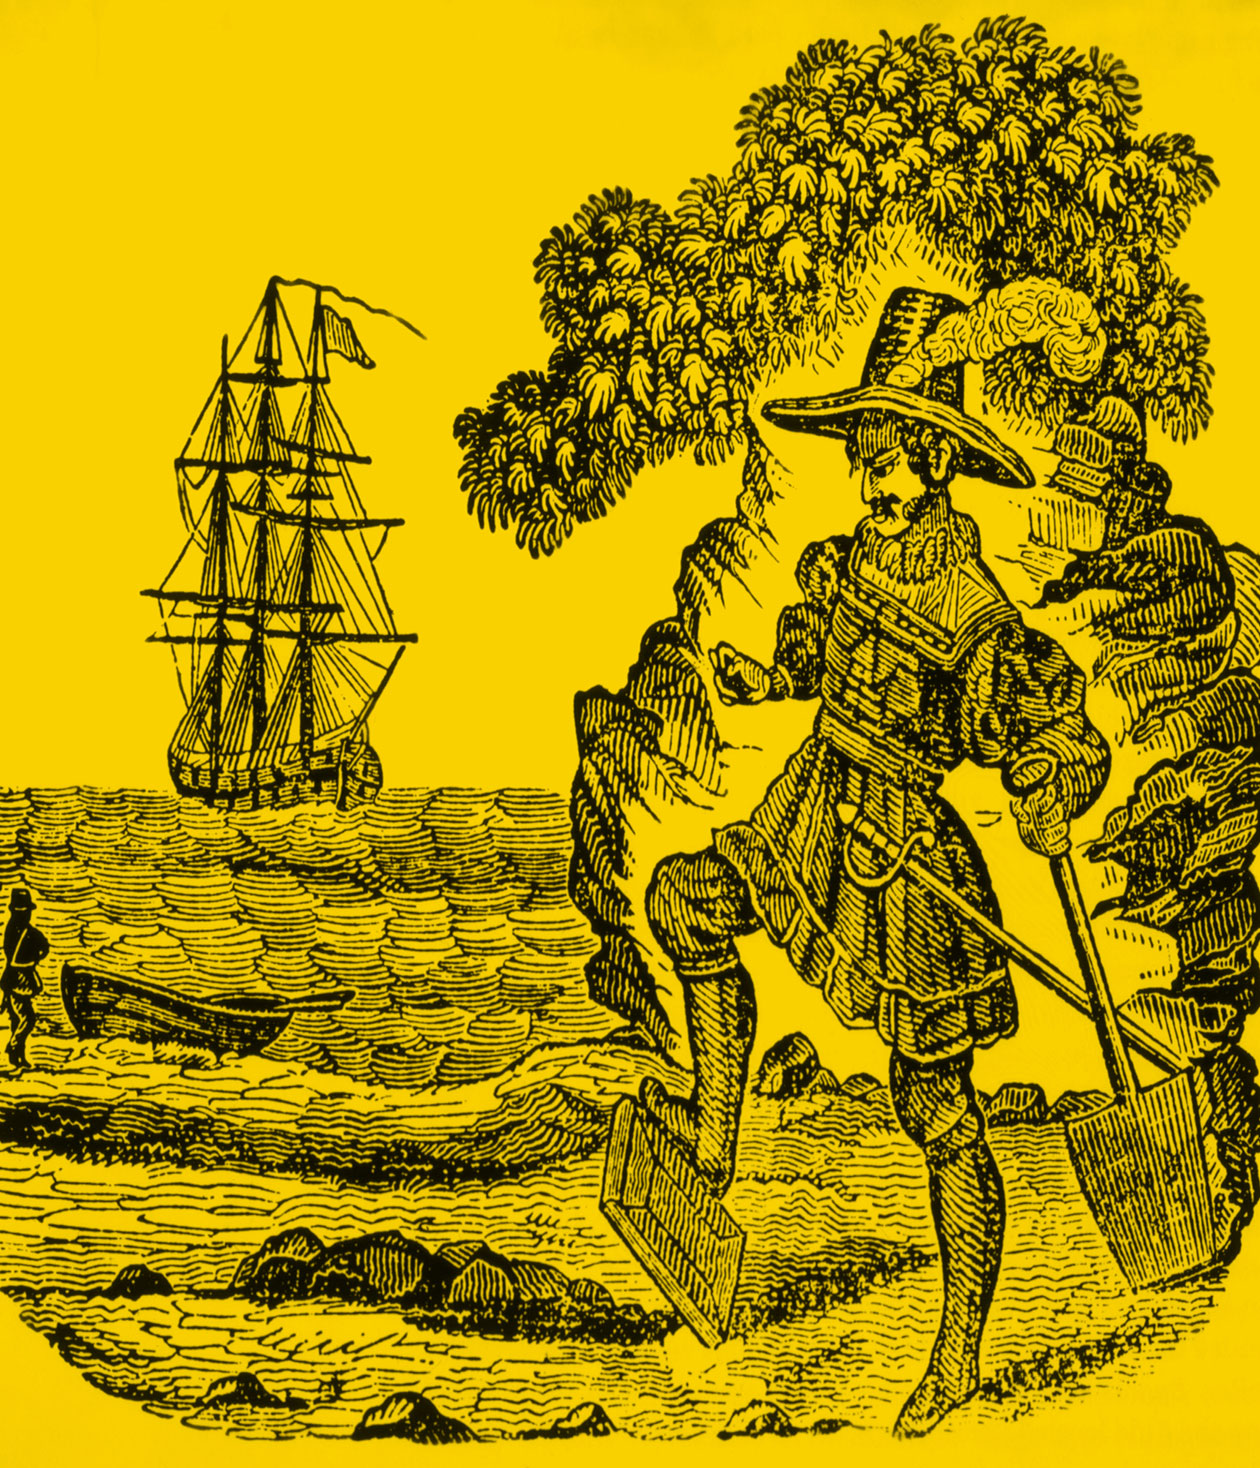 Captain Kidd - Protector to Pirate